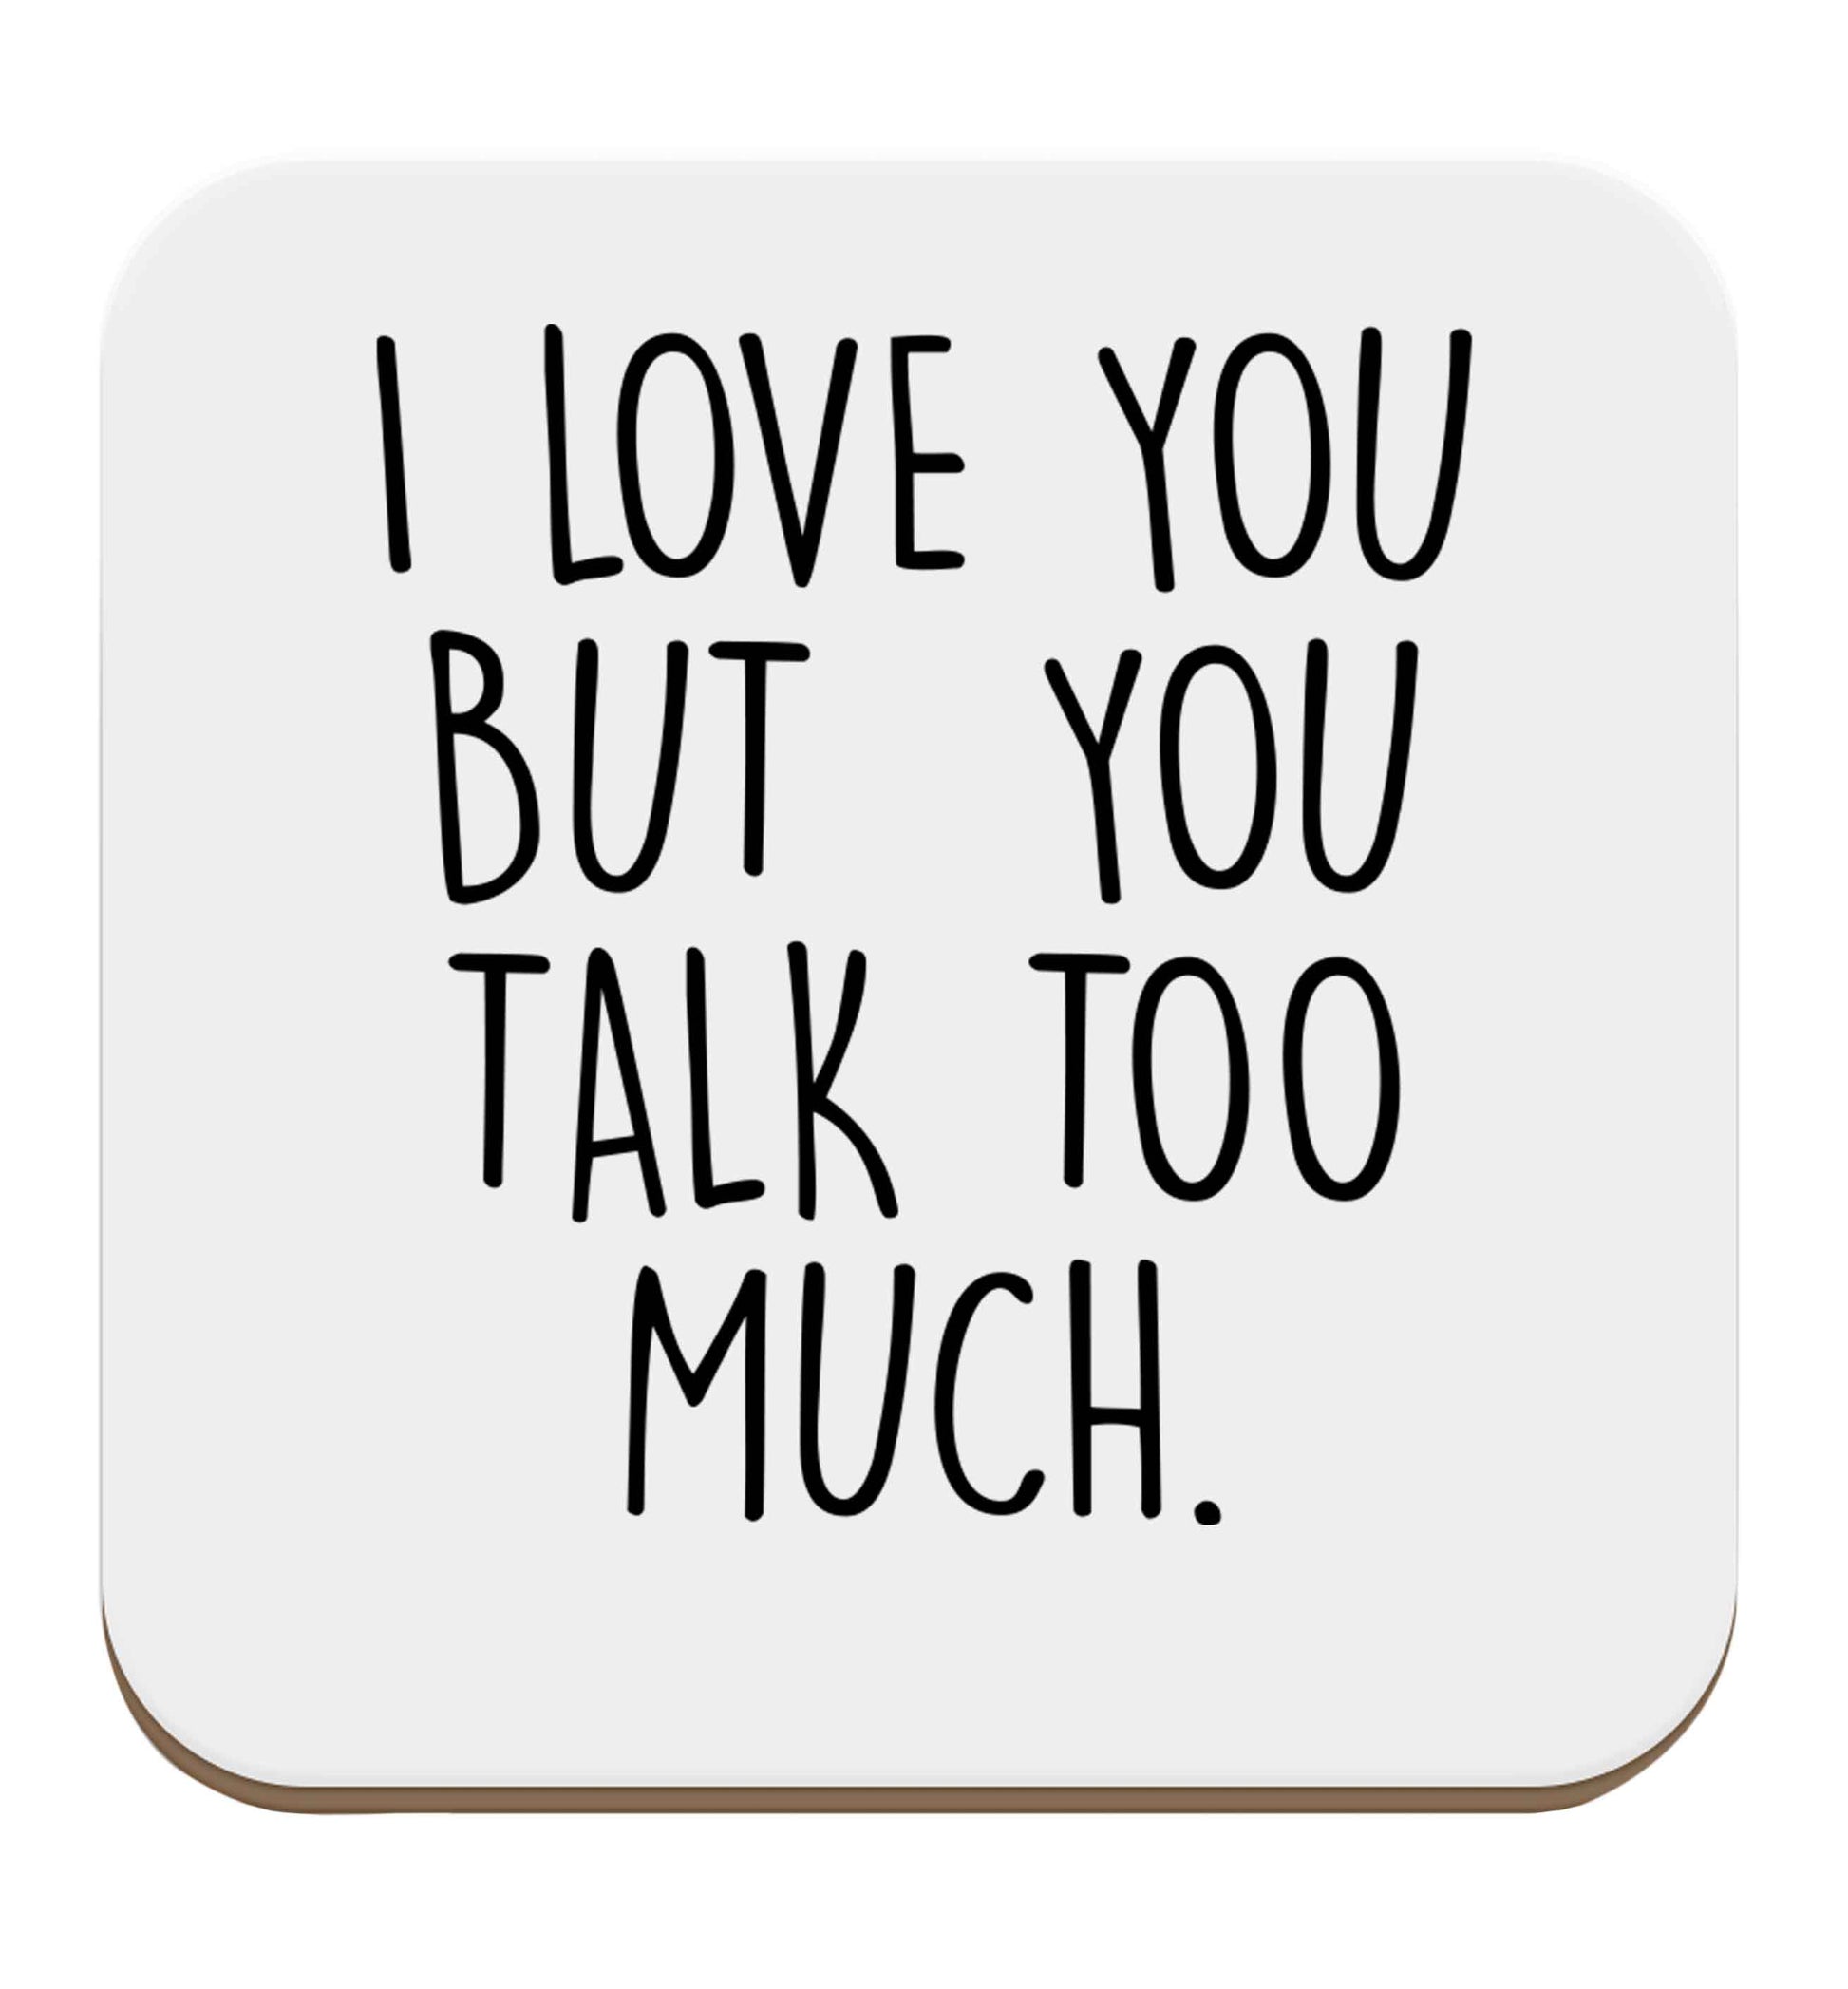 I love you but you talk too much set of four coasters